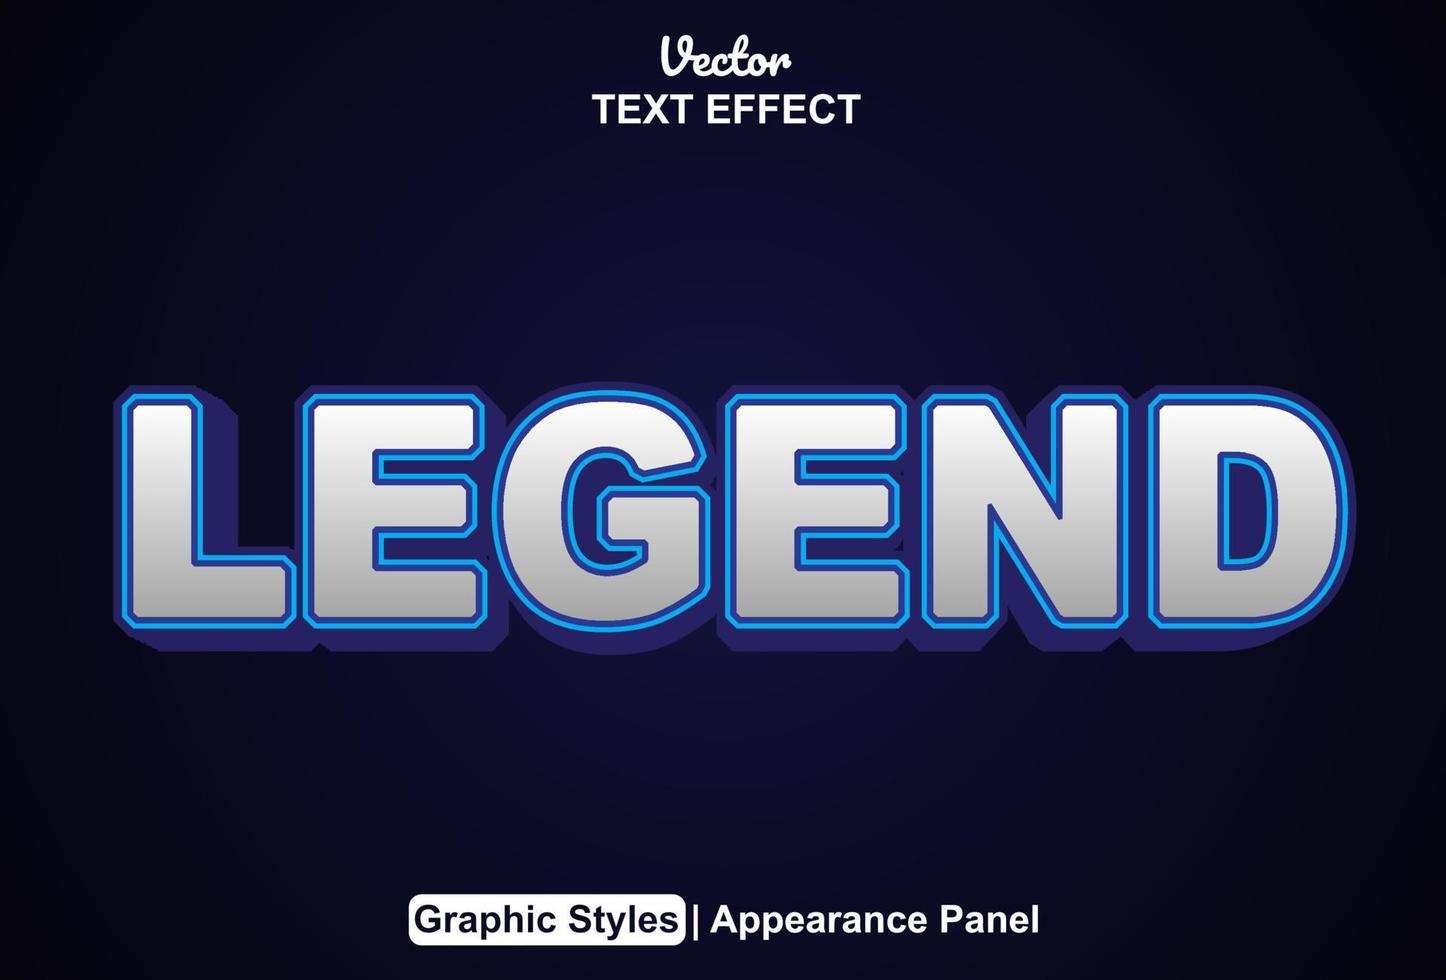 legend text effect with graphic style and editable. vector